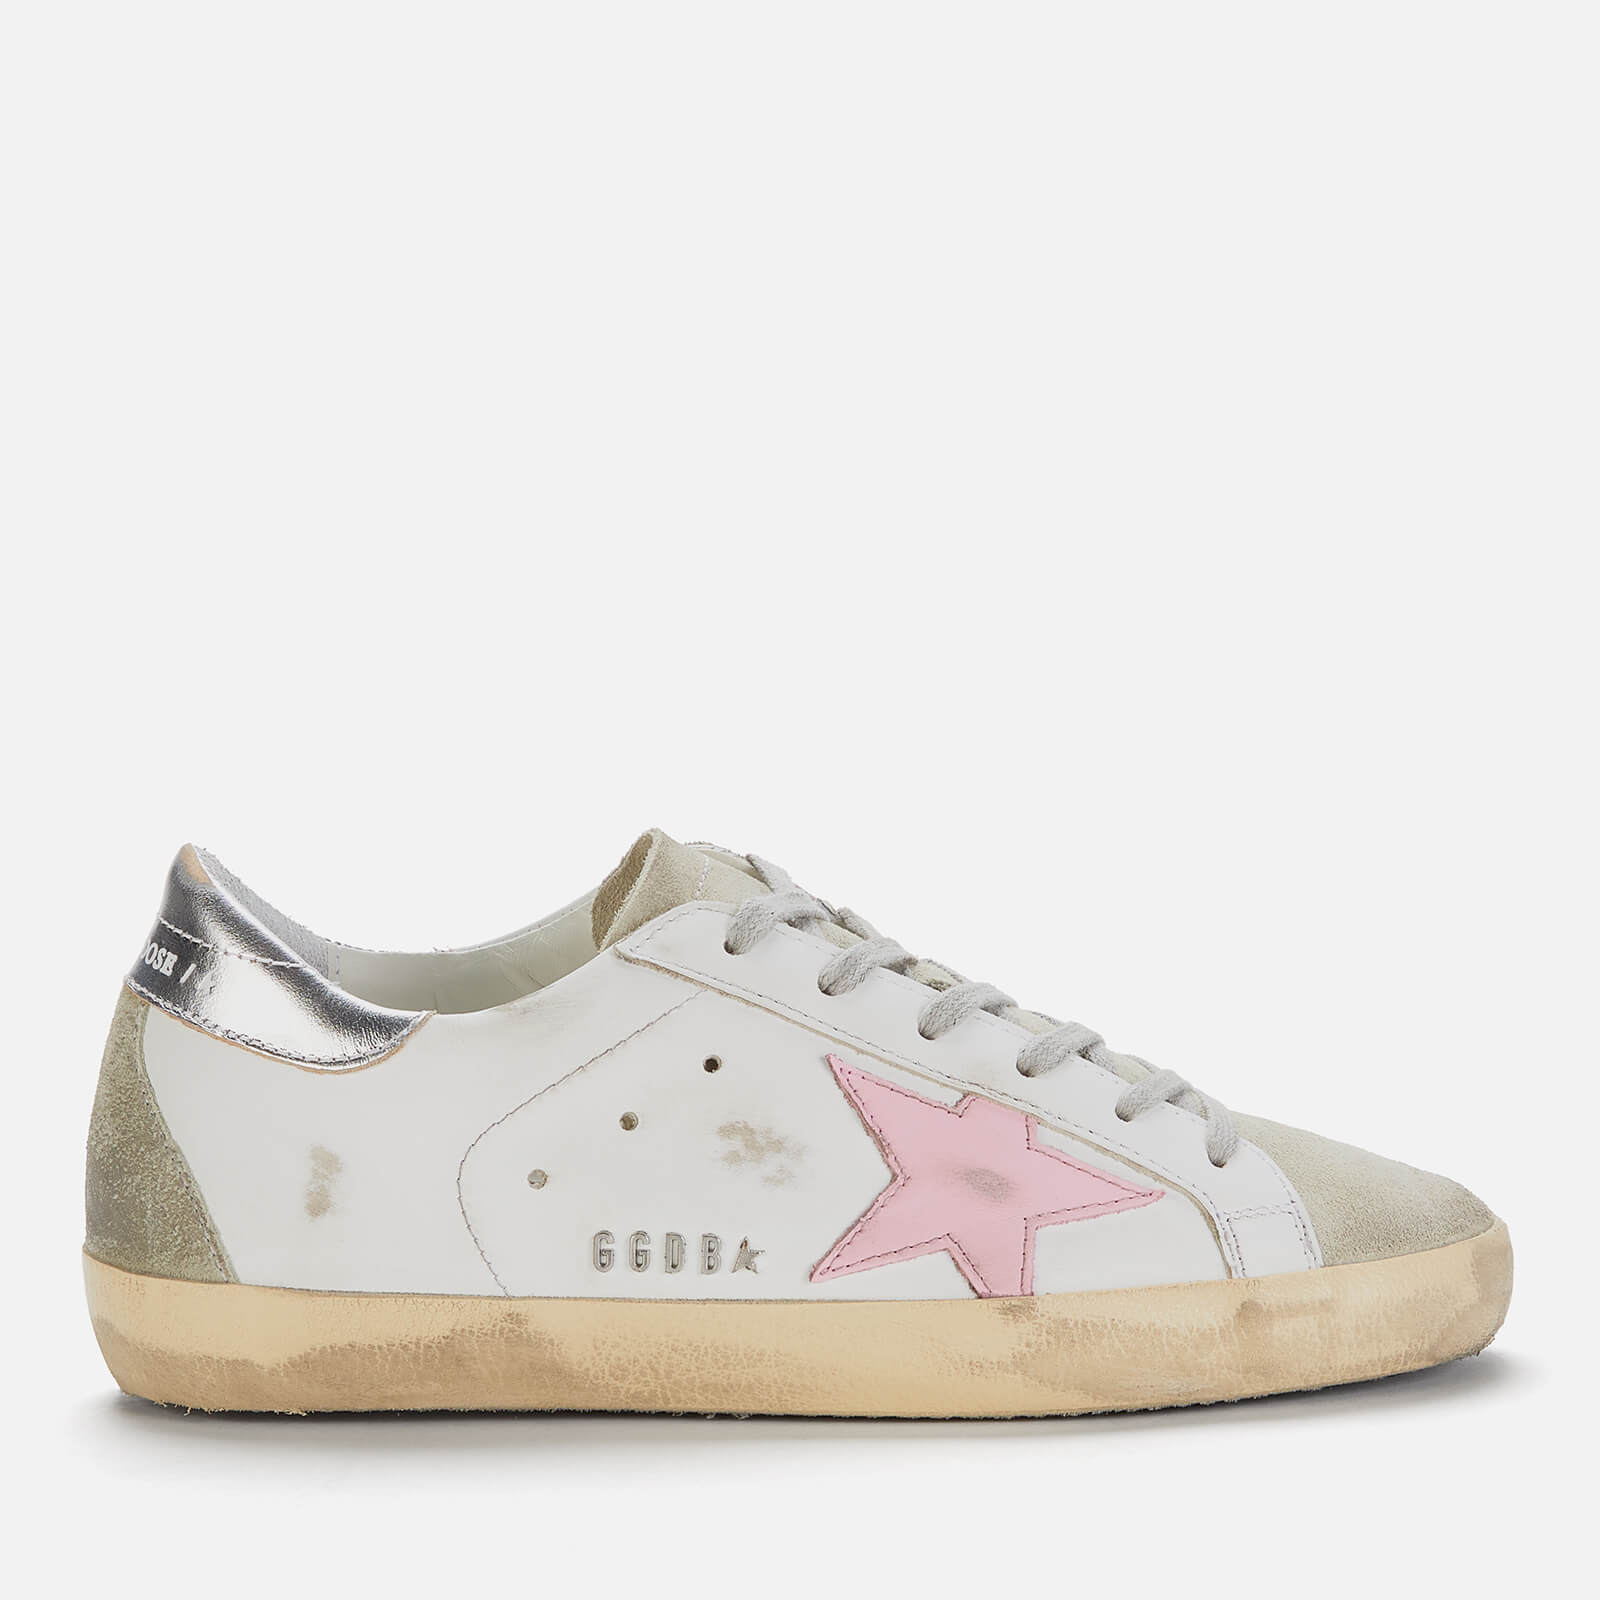 Golden Goose Deluxe Brand Women's Superstar Leather Trainers - White/Ice/Orchid Pink - UK 3